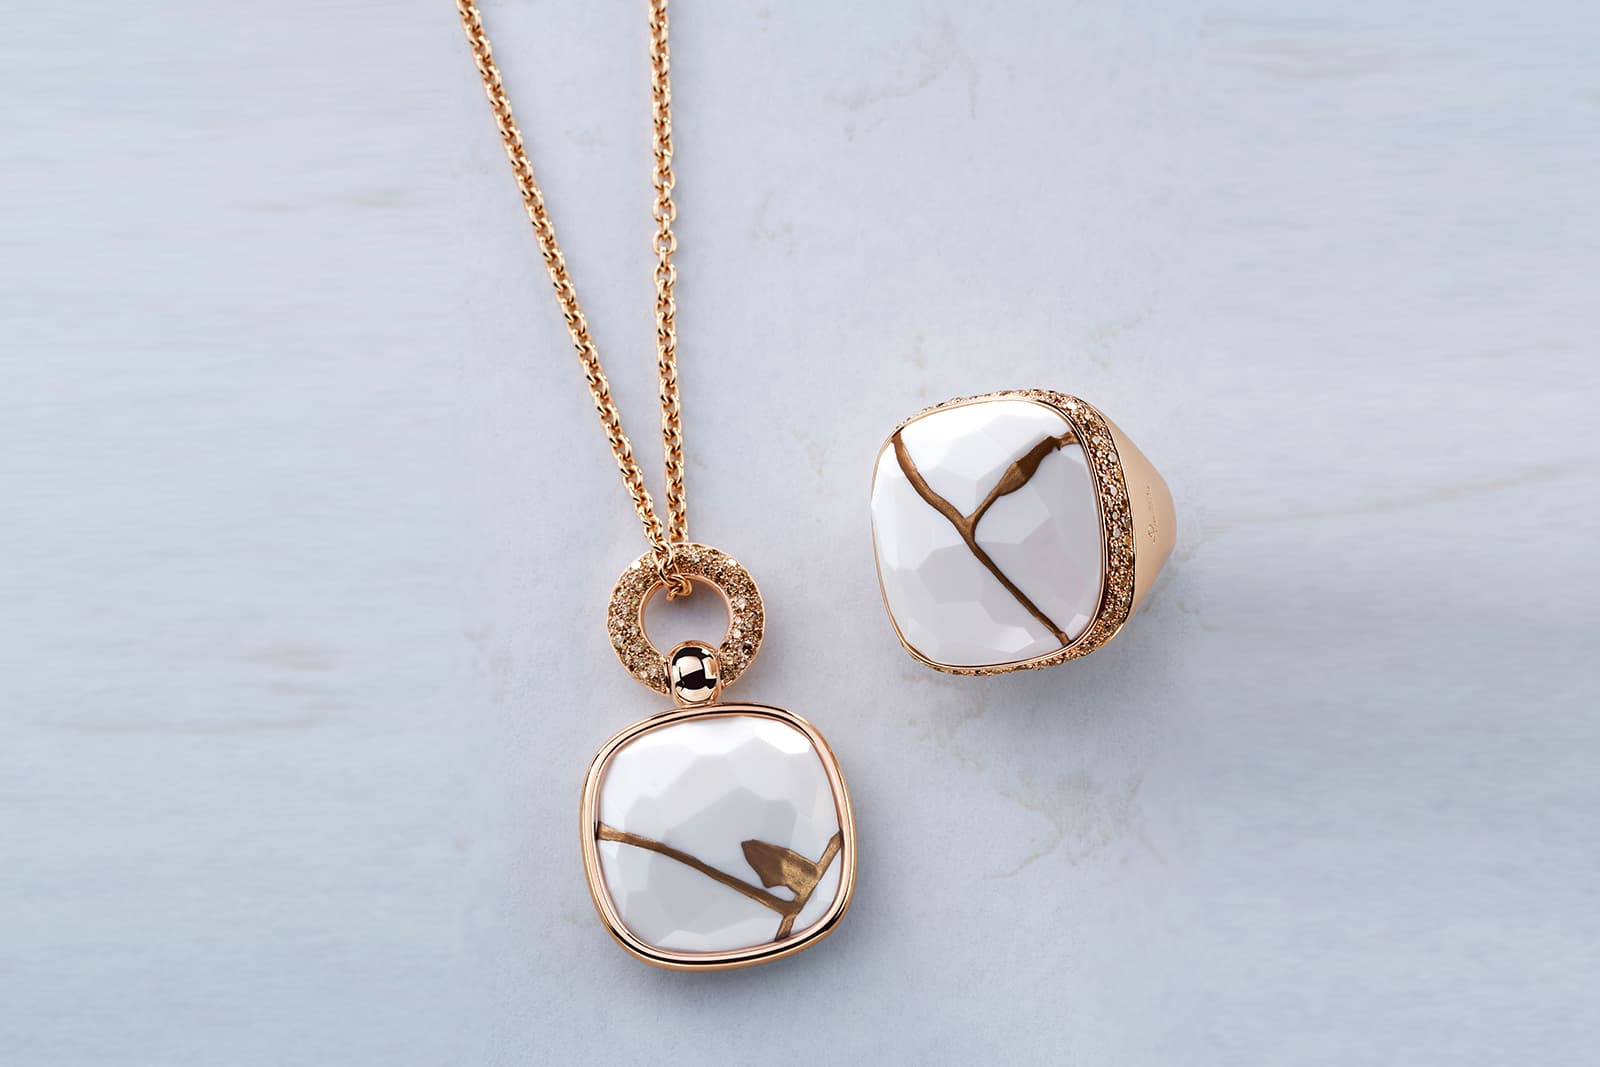 Pomellato Kintsugi Collection ring and pendant in rose gold with kogolong and brown diamonds